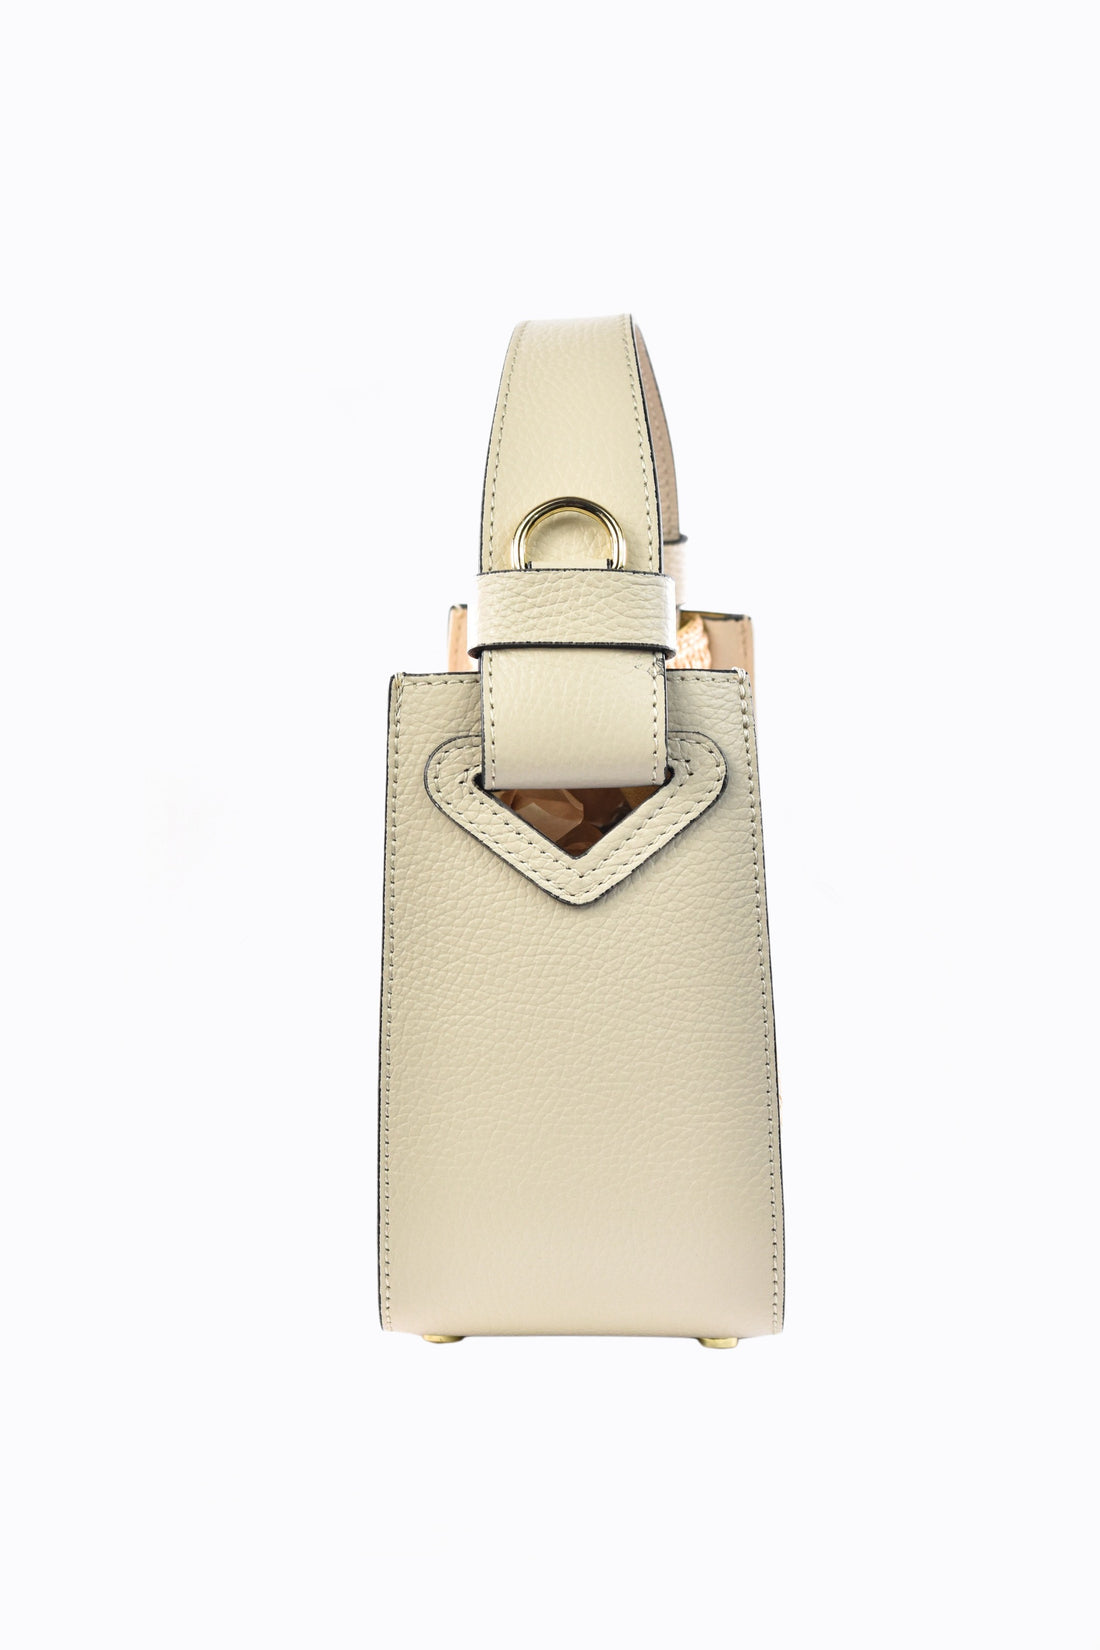 Kendall bag in Beige Dollar leather